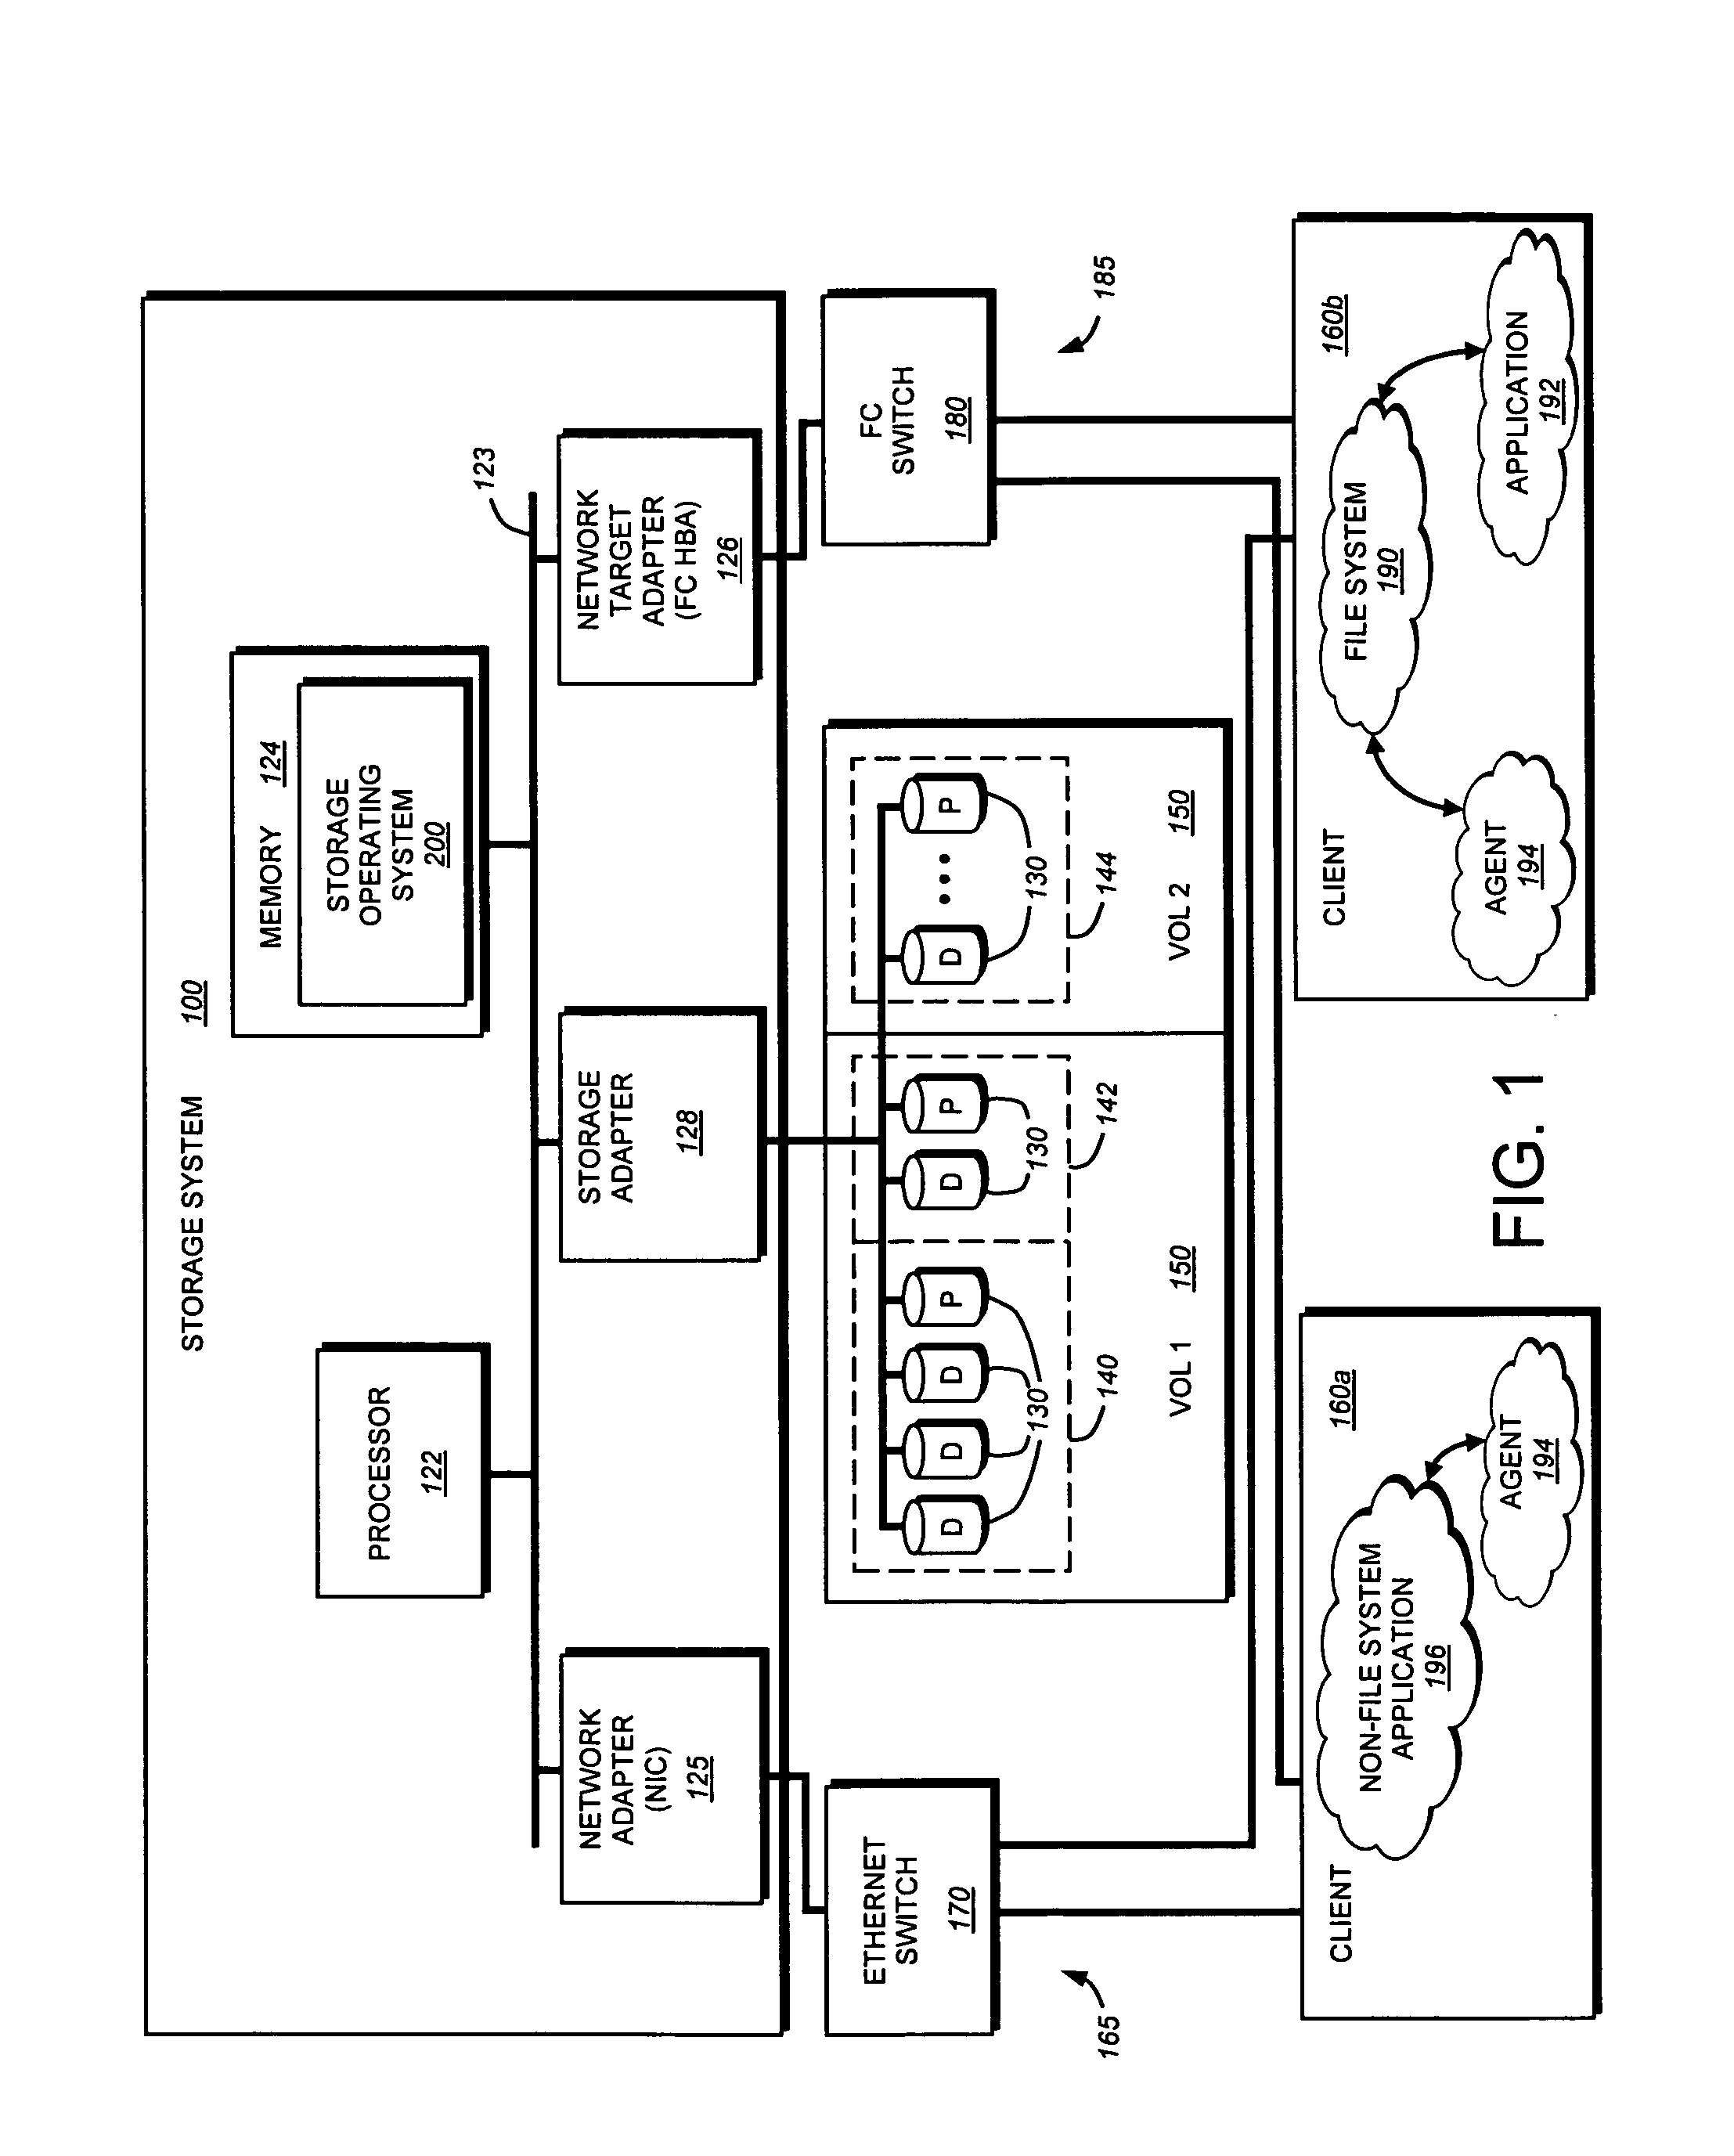 System and method for examining client generated content stored on a data container exported by a storage system